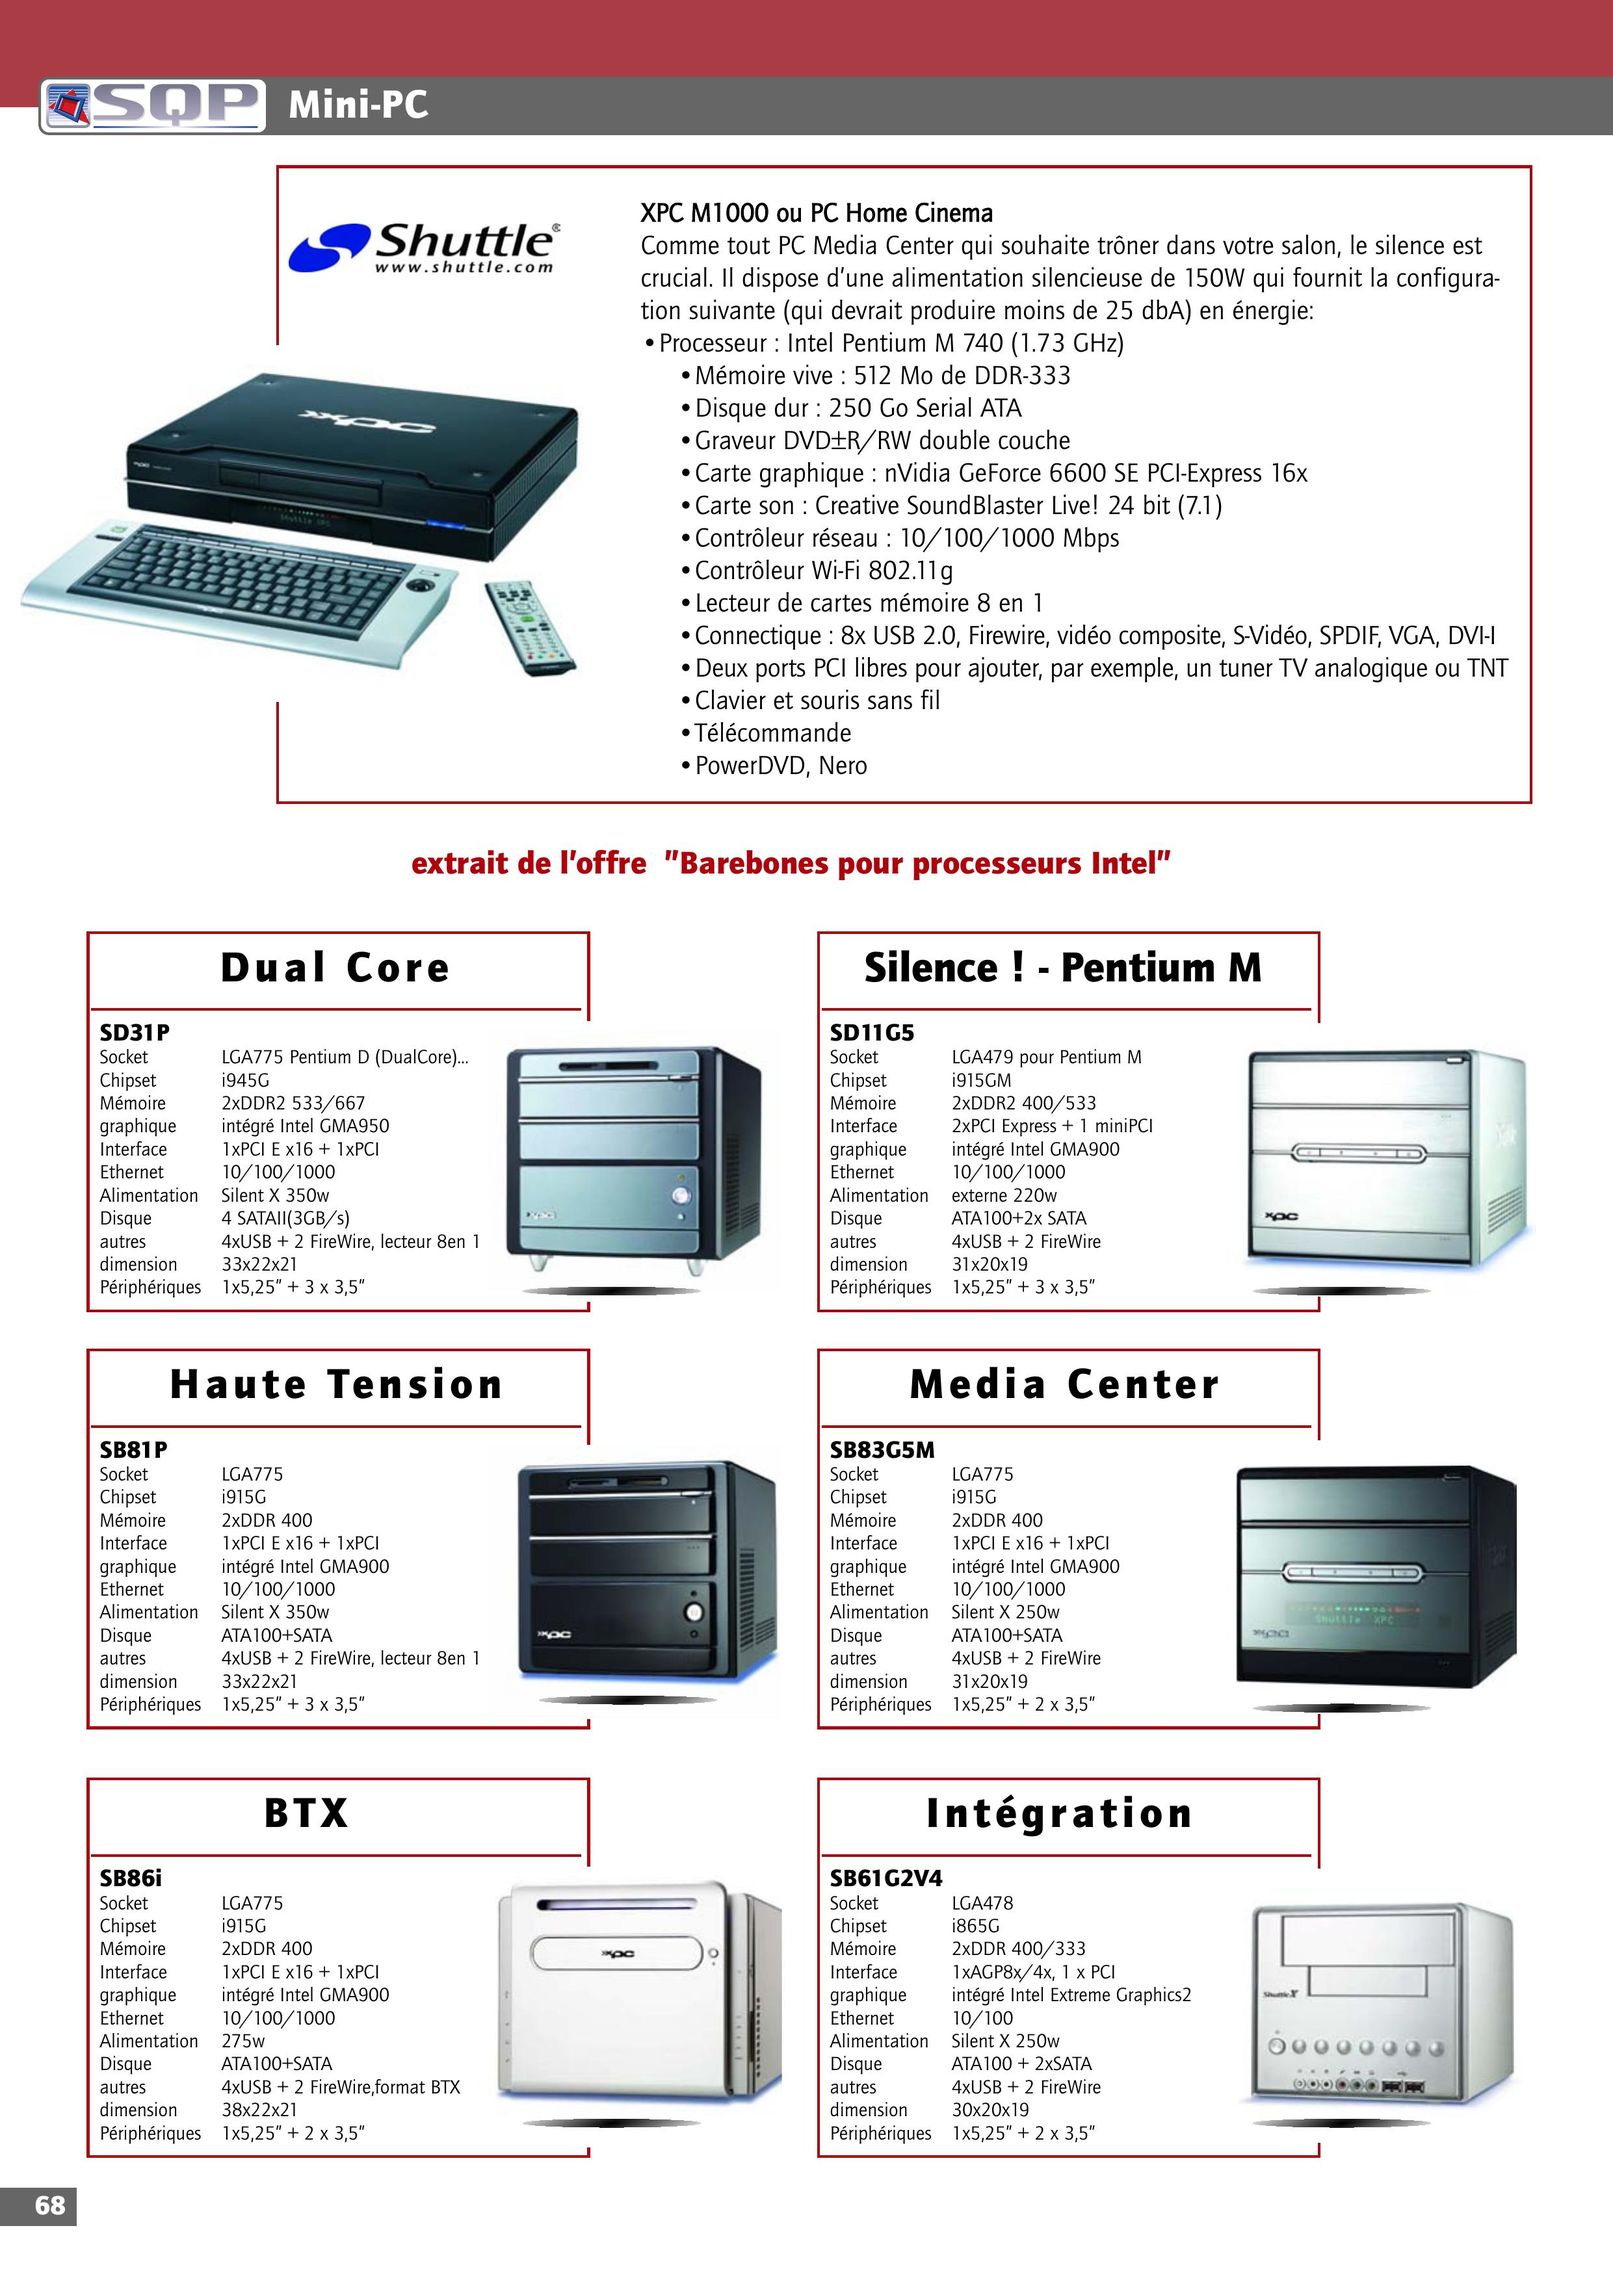 Shuttle Computer Group XPC M1000 Personal Computer User Manual